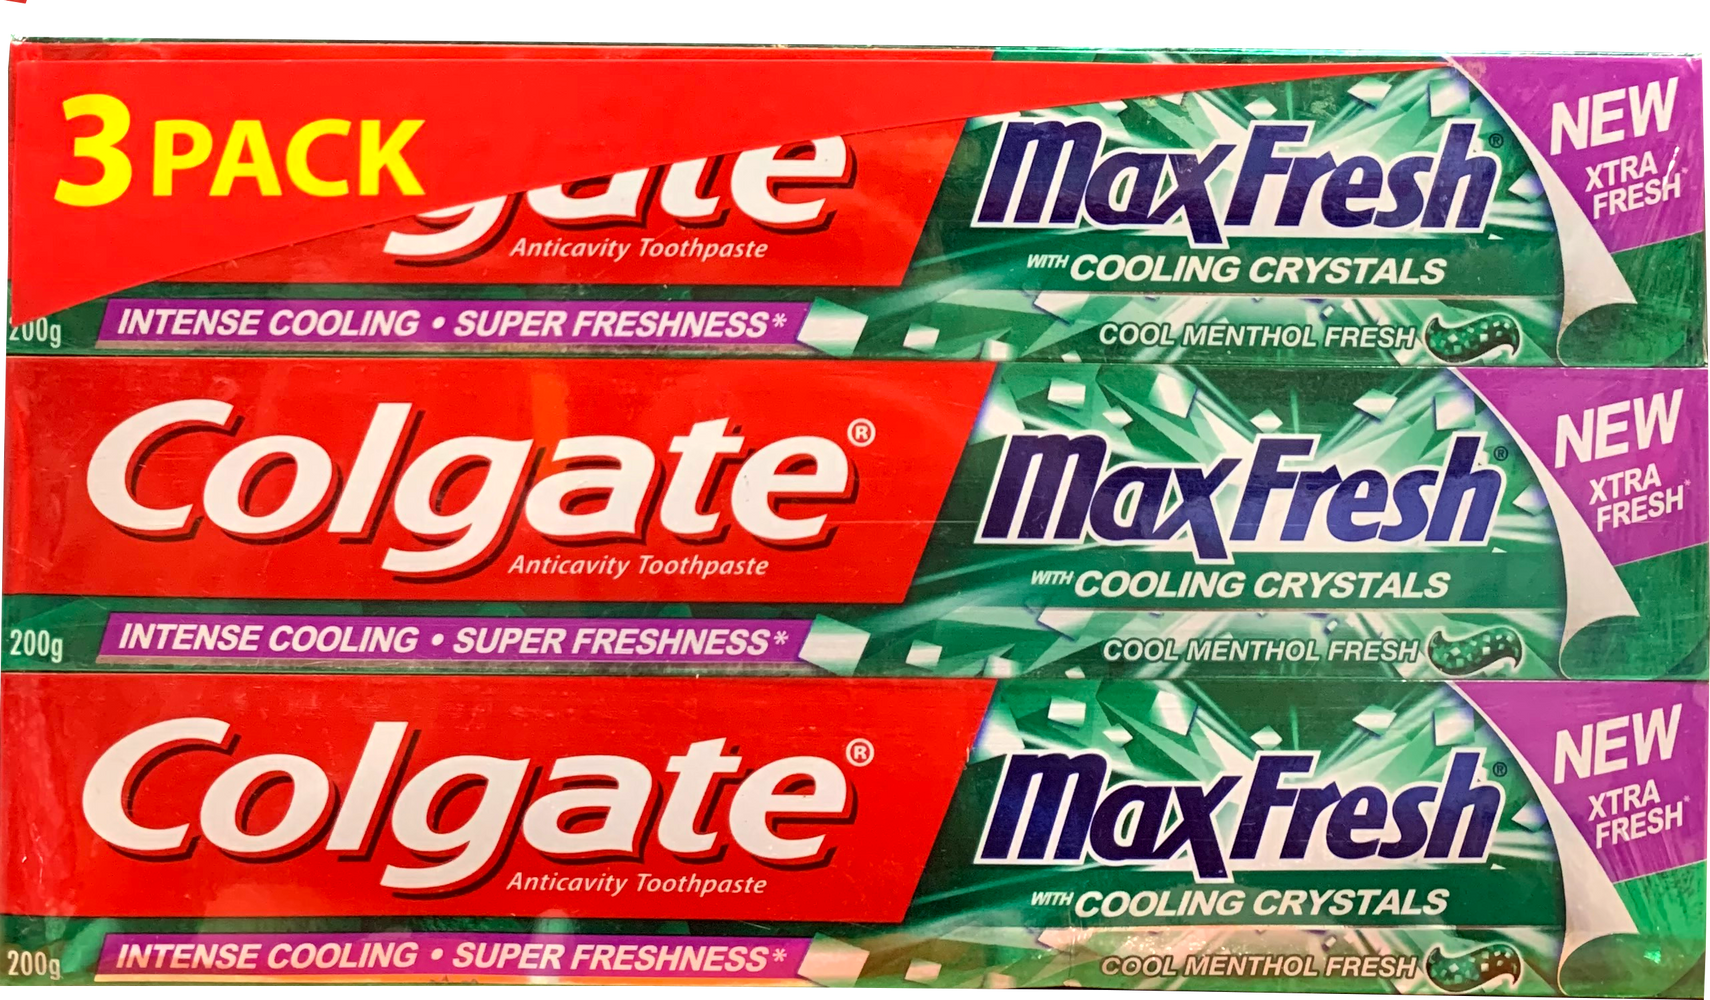 Colgate Max Fresh Cooling Crystals Toothpase, 3-Pack, 3 x 7 oz